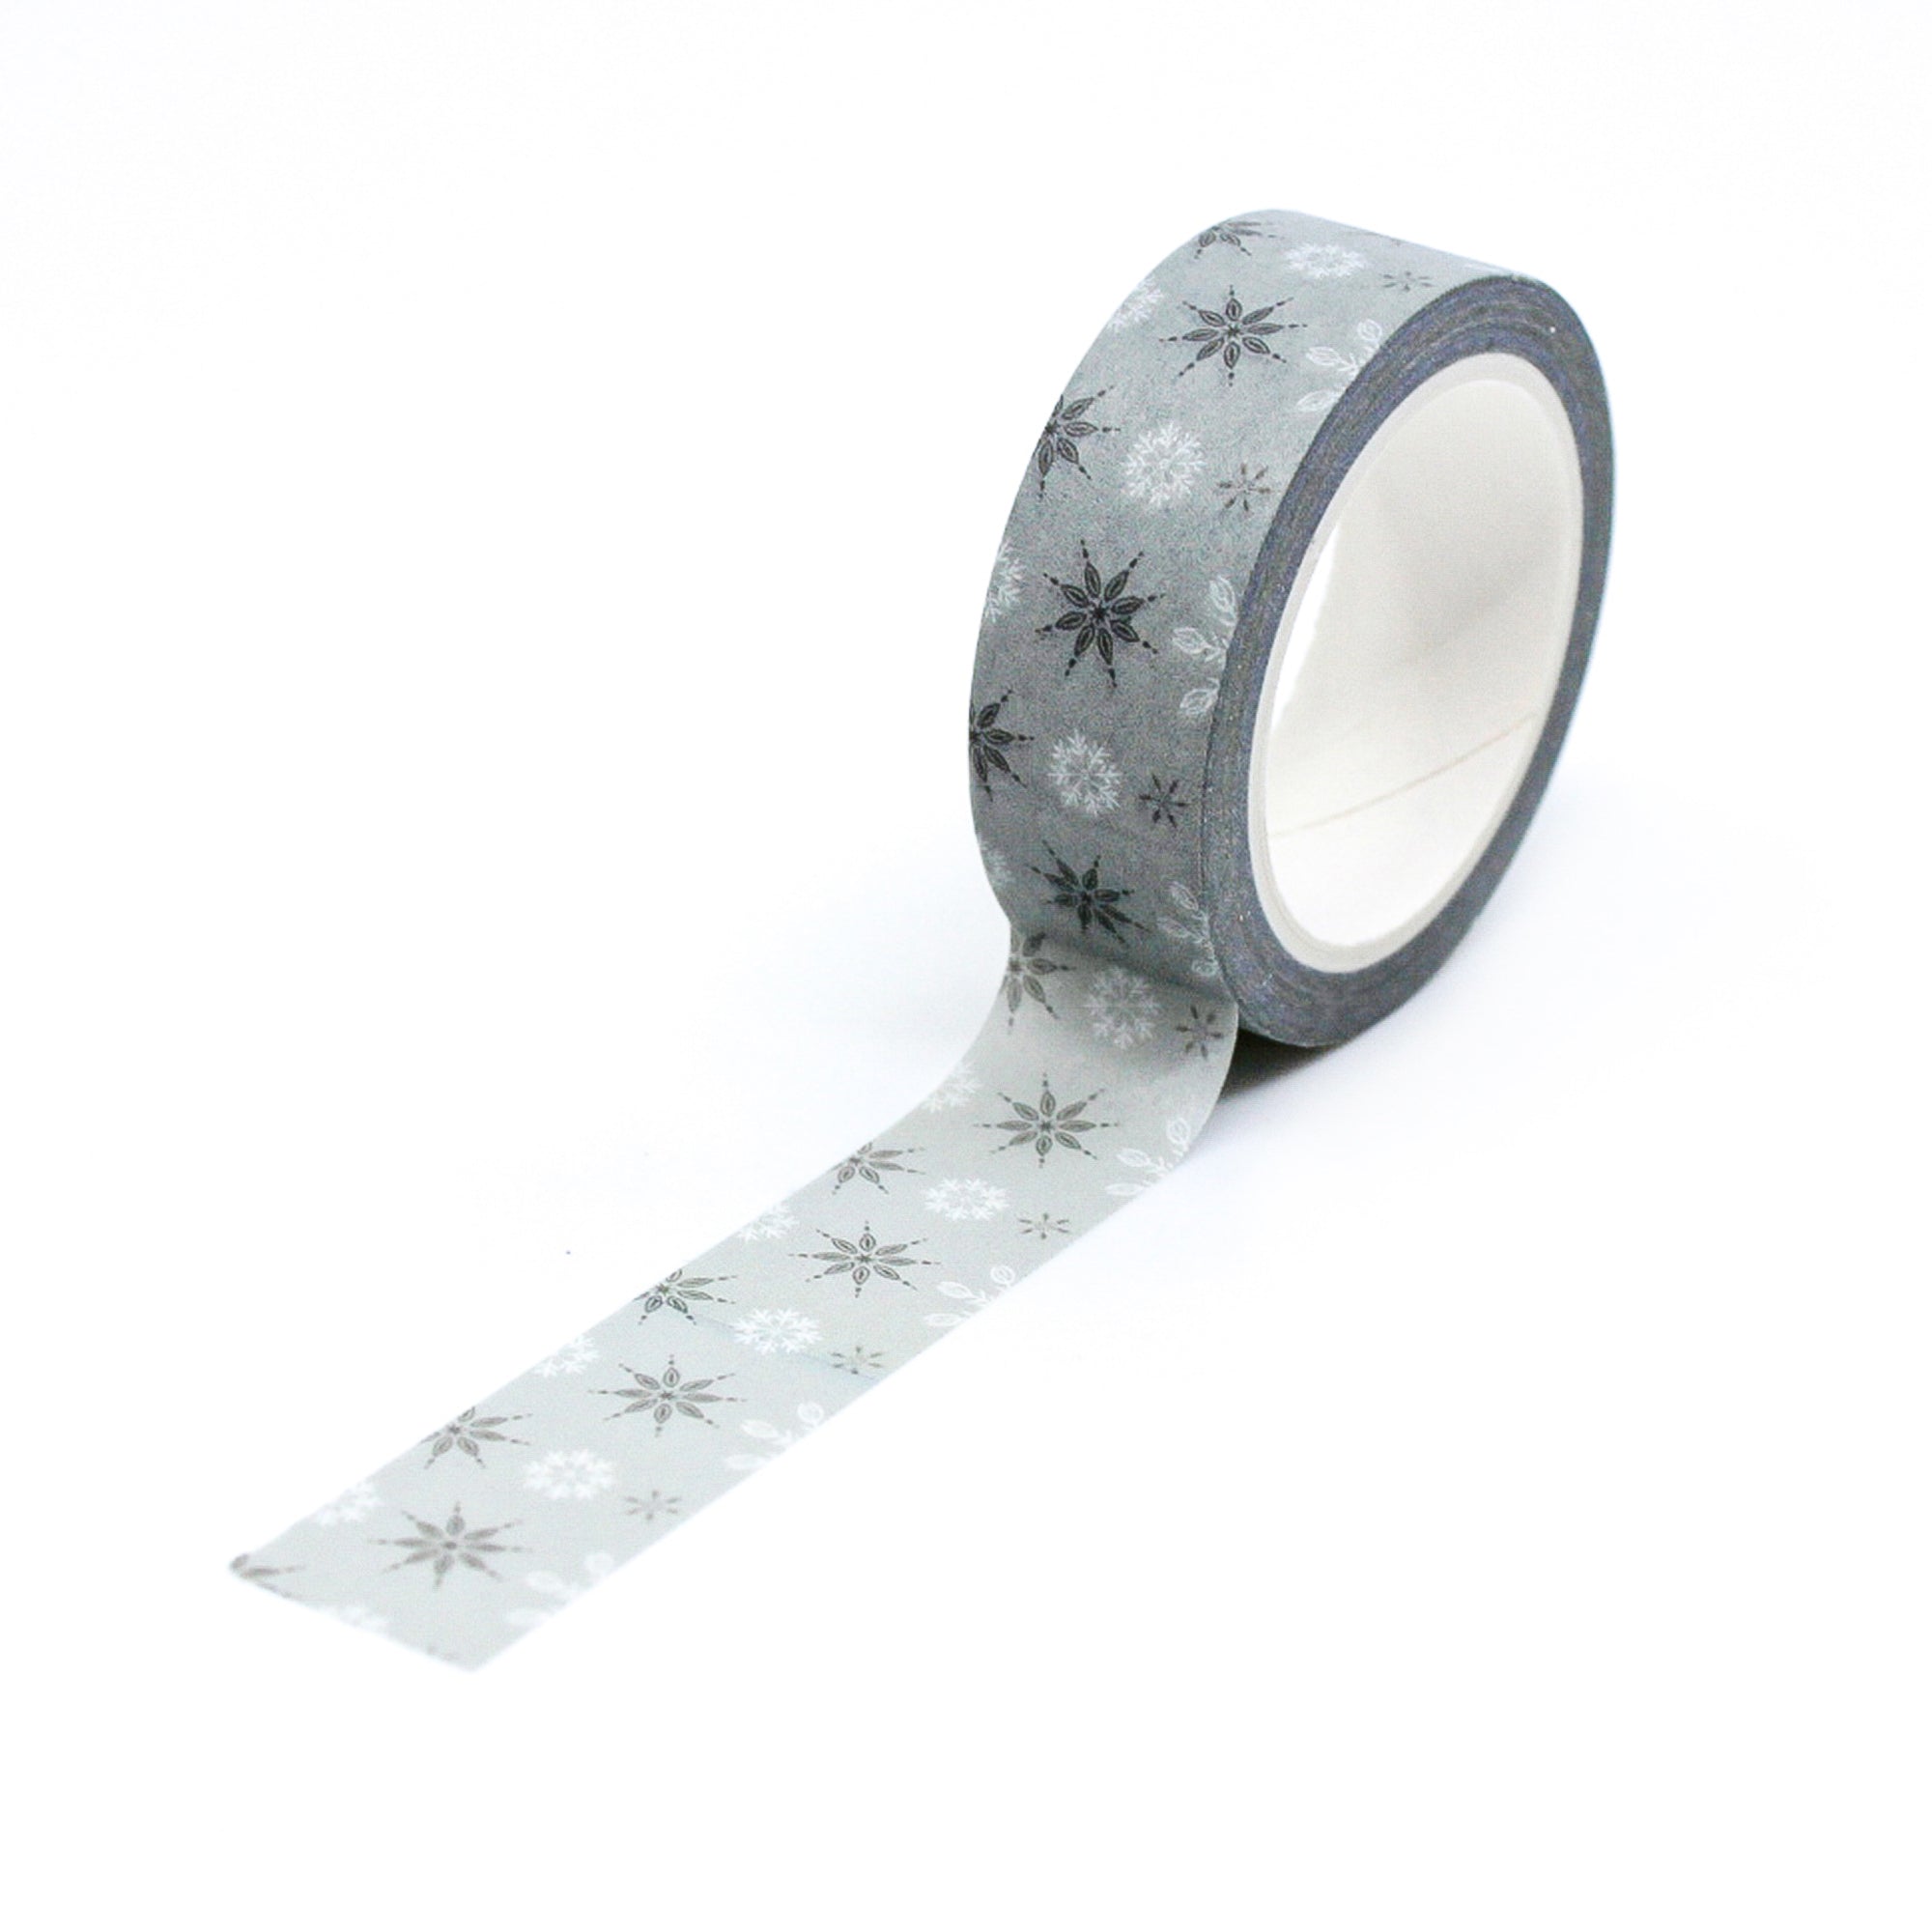 Embrace the tranquil beauty of winter with our Muted Colors Winter Snowflake Washi Tape, adorned with delicate and elegant snowflake patterns. Ideal for adding a touch of winter wonder to your projects. This tape is from Maylay Co. and sold at BBB Supplies Craft Shop.